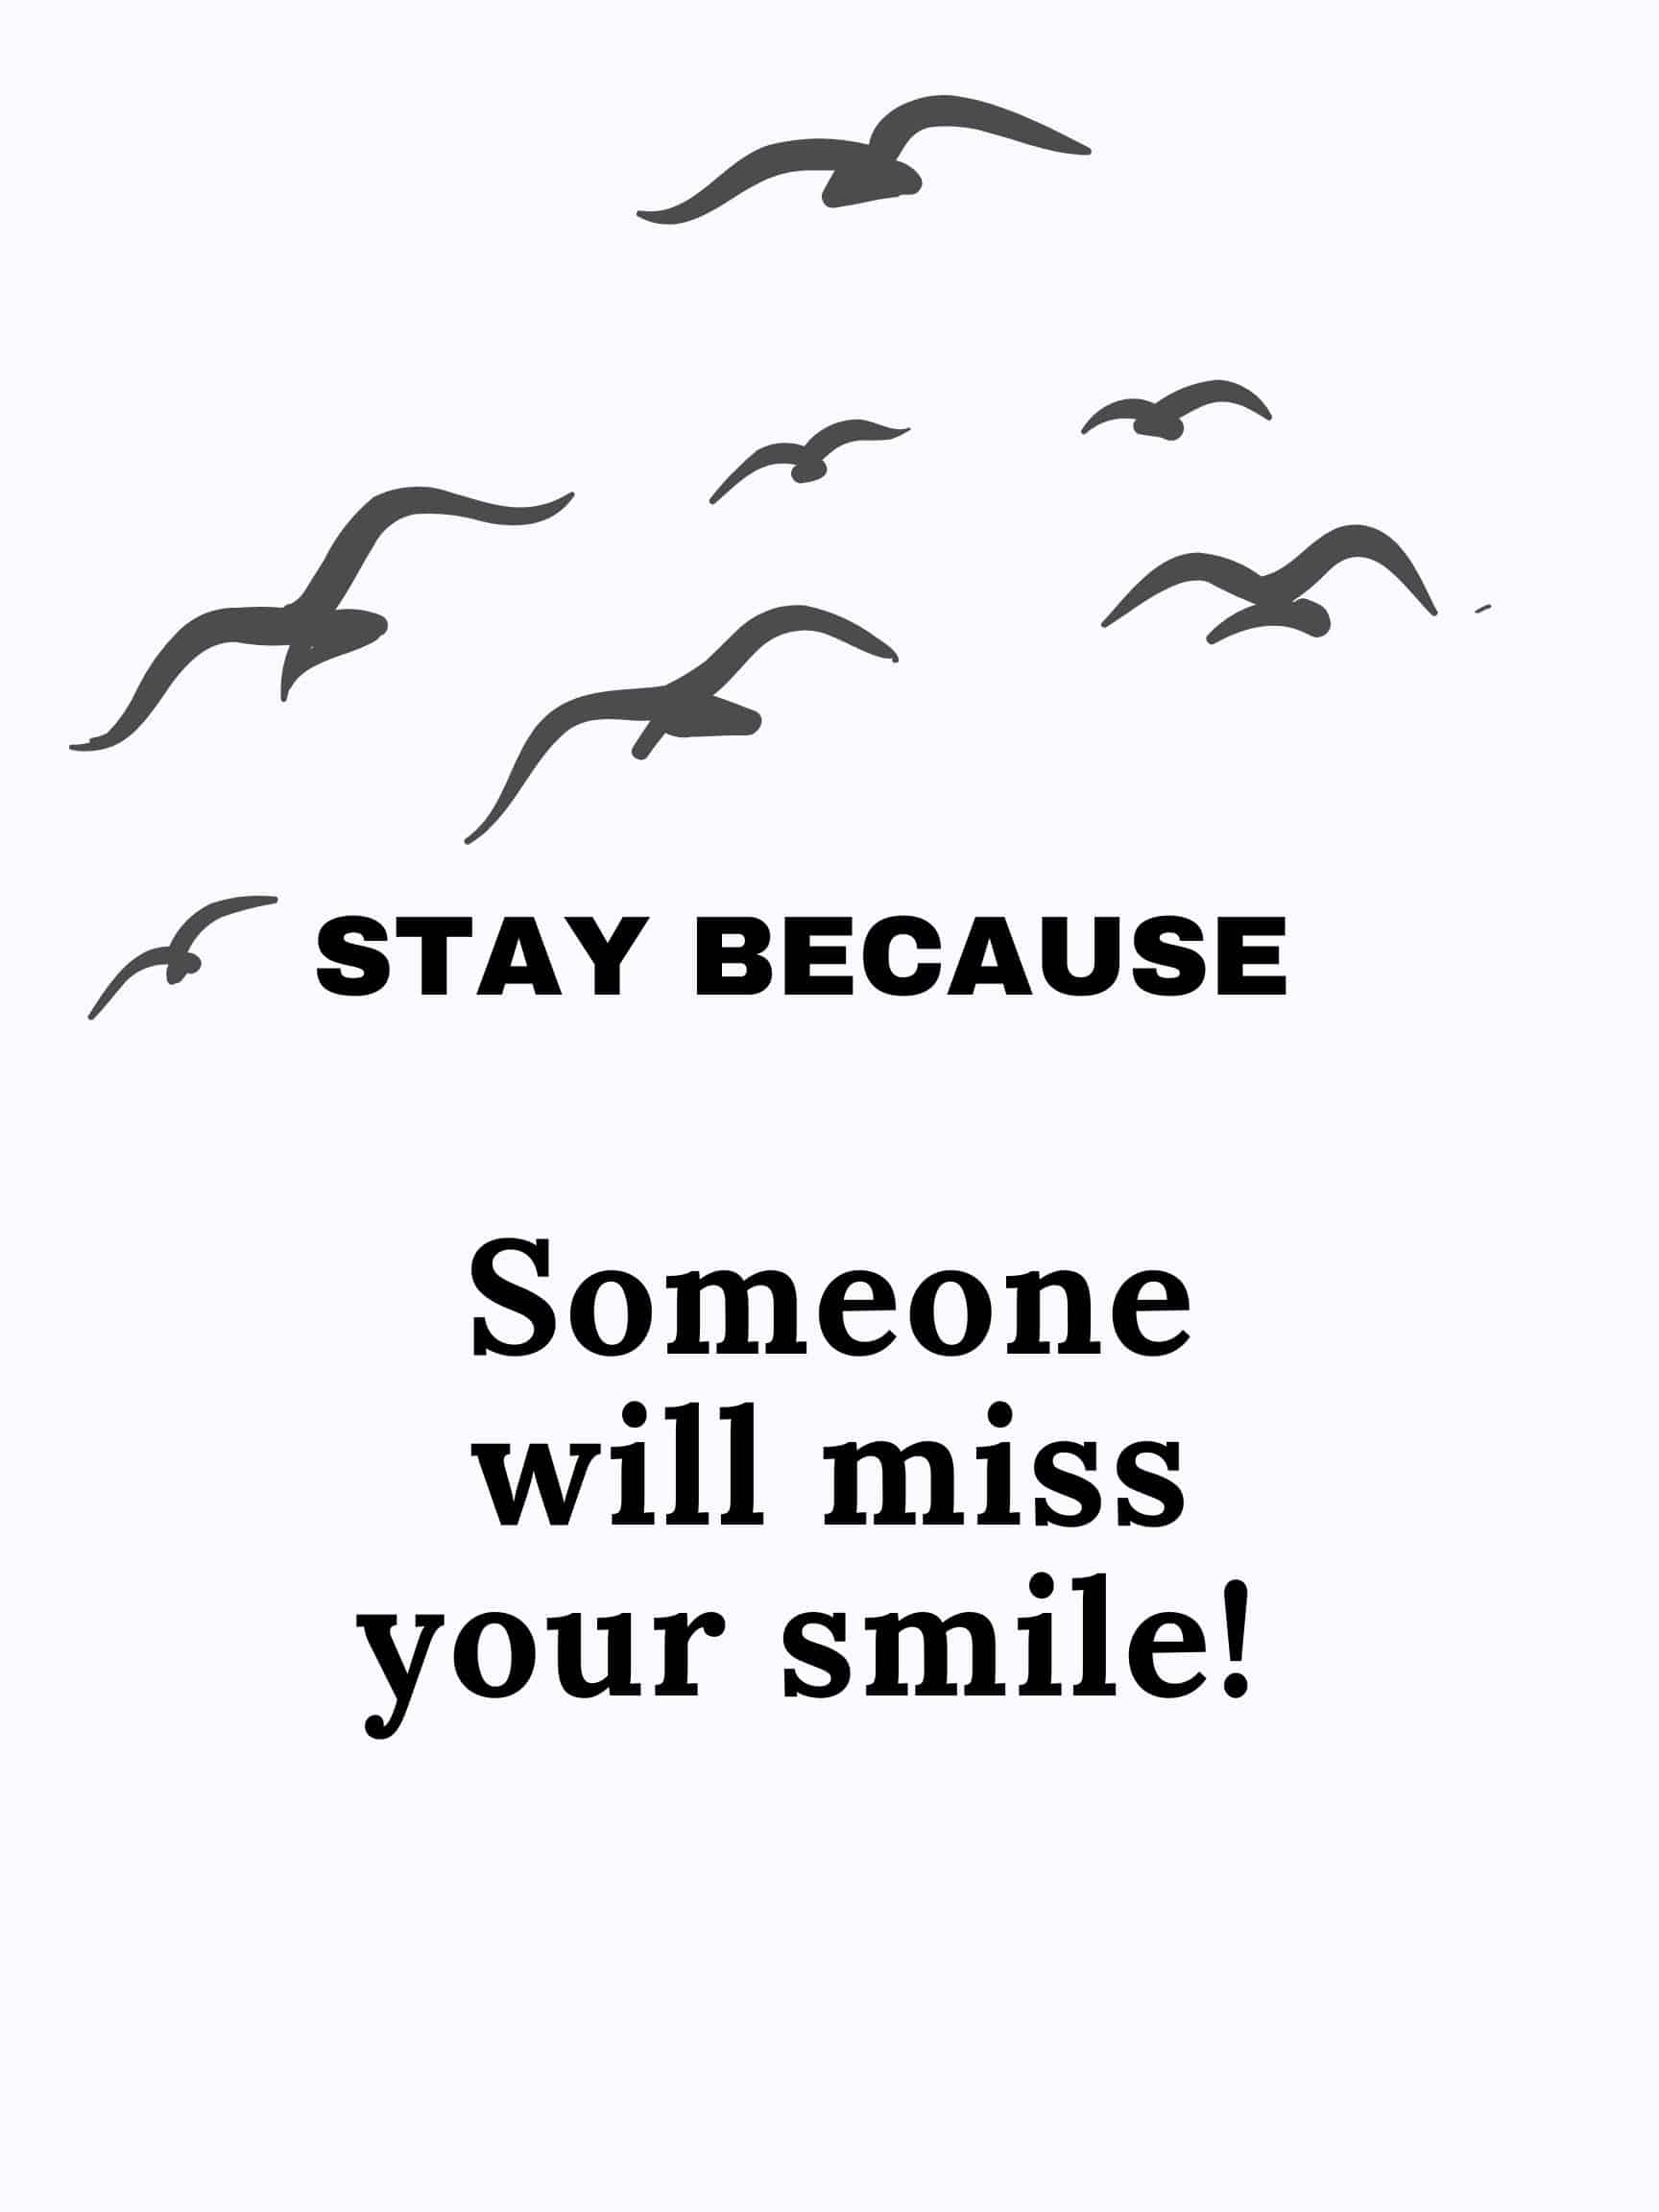 Stay because someone will miss your smile